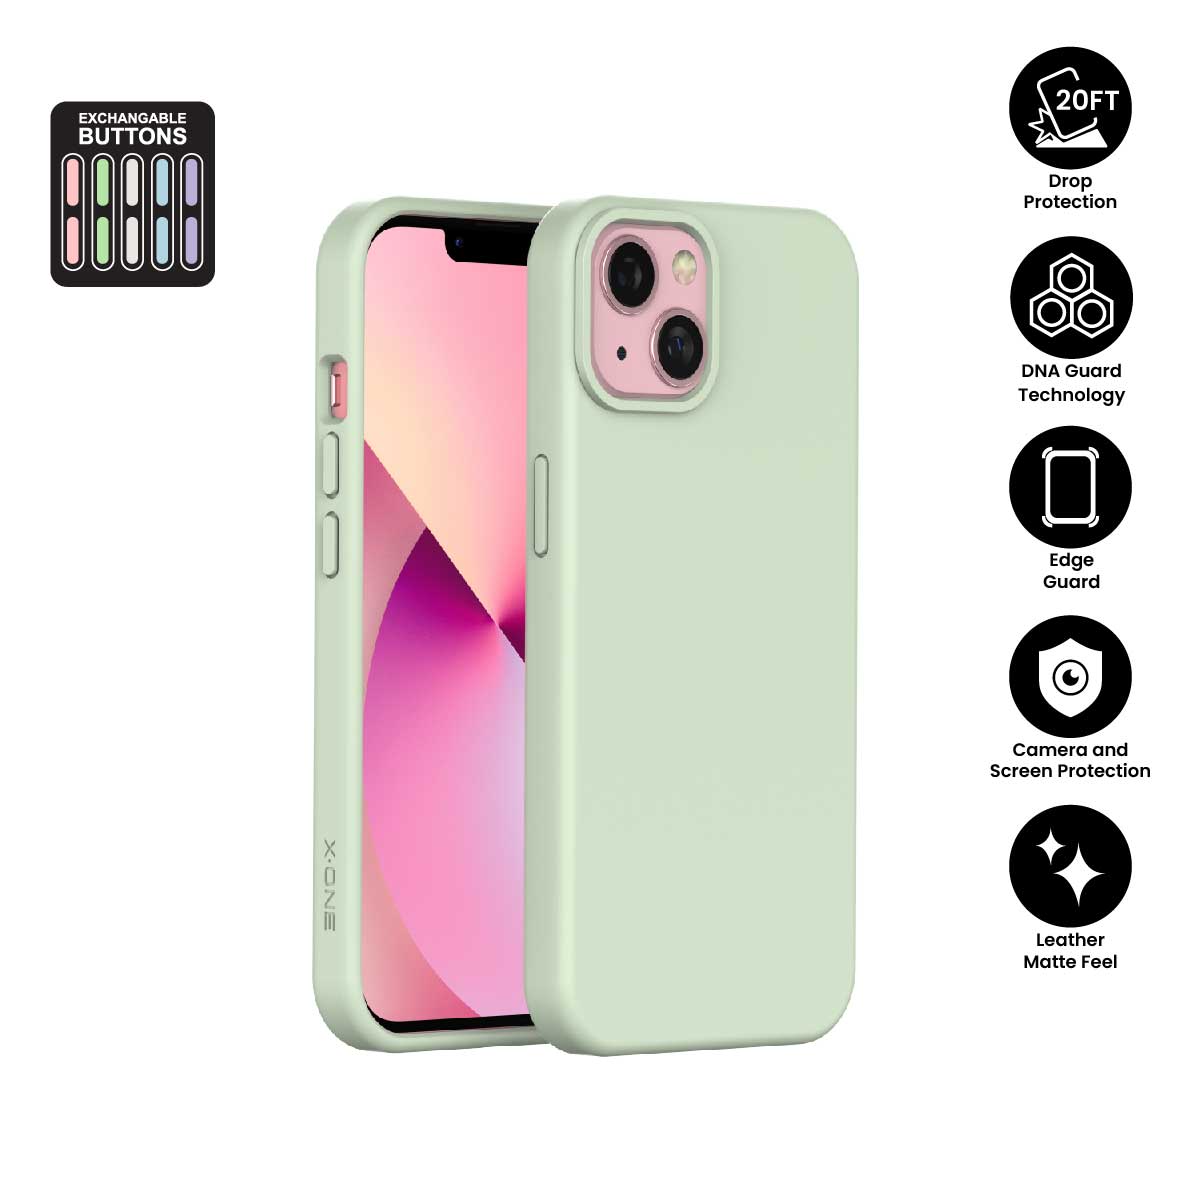 X.One® Shock Dominator (Pastel Series) Impact Protection Case for iPhone 14 Series